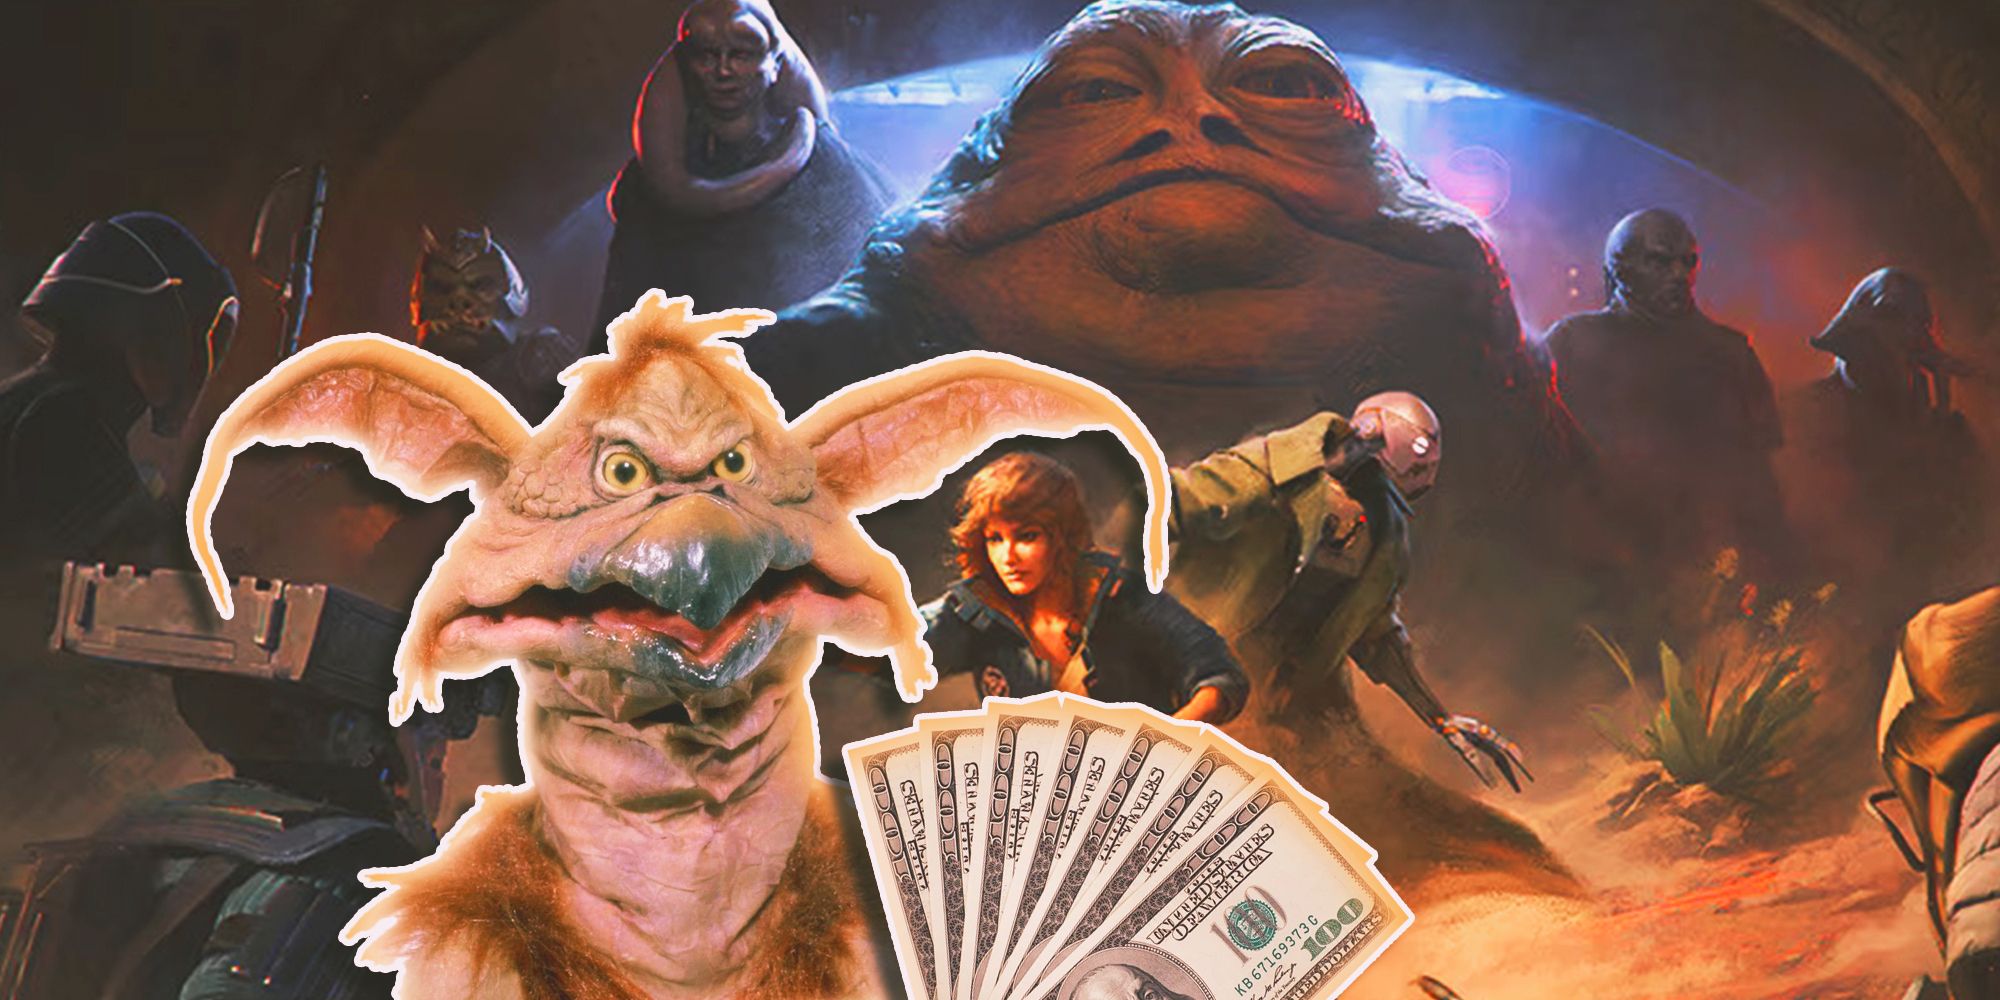 In the foreground, Salacious Crumb from Star Wars holding up a bunch of hundred dollar bills. In the background, the heroes of Star Wars Outlaws plus Jabba the Hutt